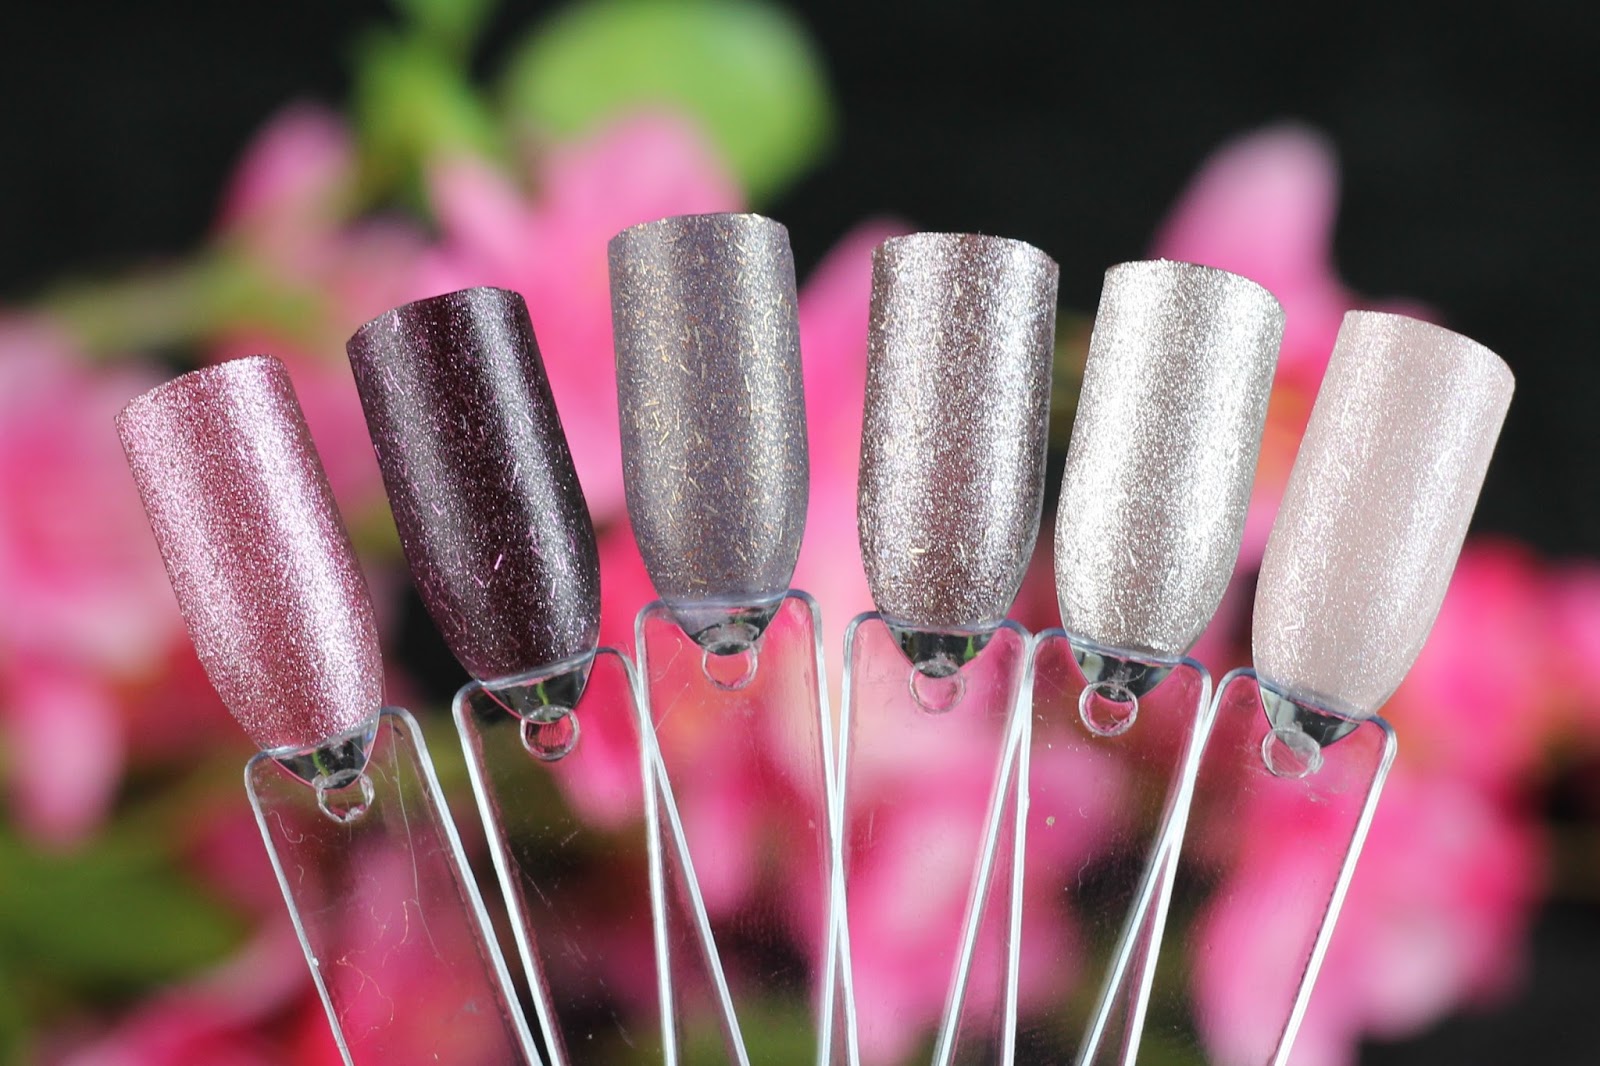 Catrice, Moon Rock Effect Nail Lacquer, review, swatches, tragebilder, neues sortiment, effect nail lacquer, moon rock, herbst, 2016, nagellack, nailpolish, glitzer, moonlight berriage, magical bluelight, drogerie, 